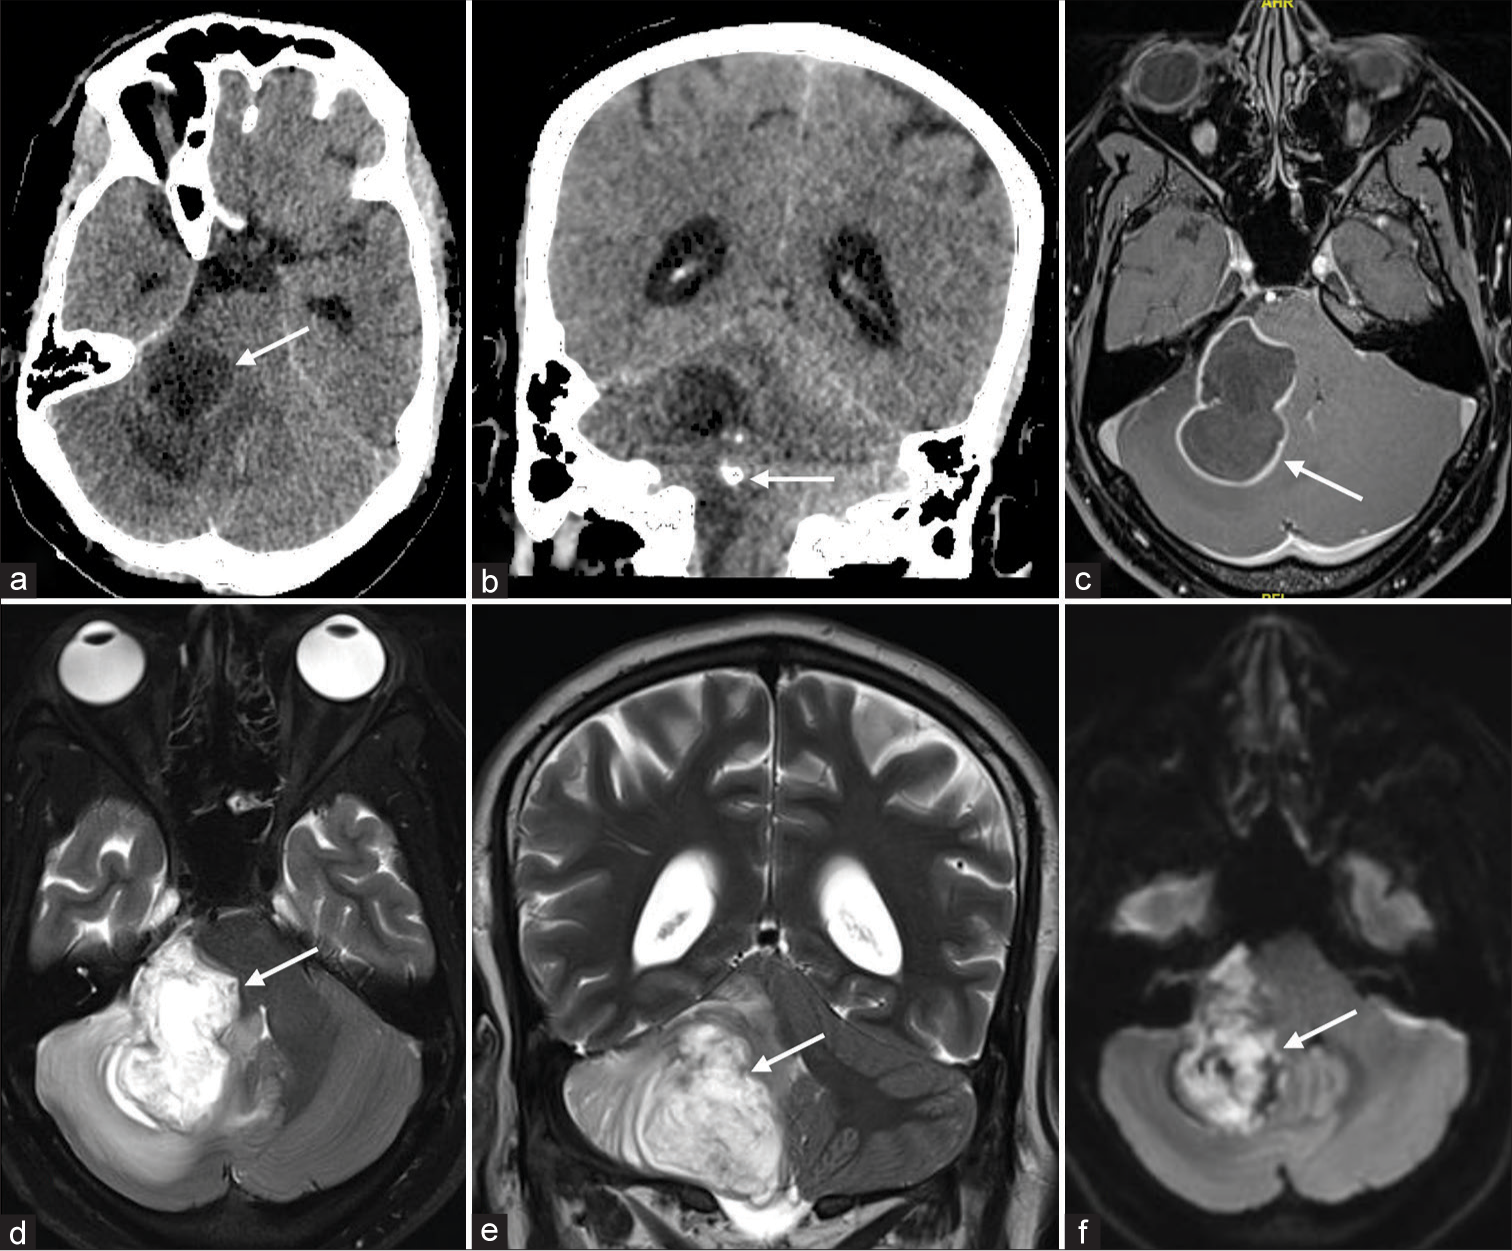 (a) Computed tomography (CT) shows a cystic mass like lesion in the right cerebellar hemisphere (white arrow). (b) CT demonstrates an eccentric nodular calcification (white arrow). T1W post contrast MR, (c) shows peripheral wall enhancement (white arrow). T2 weighted axial and coronal MR images (d and e respectively) demonstrates cystic nature of the lesion with involvement of the right middle cerebellar peduncle and an exophytic component along the right side of pons (white arrows). Diffusion sequence (f) shows central restriction diffusion (white arrow). MR: Magnetic resonance.